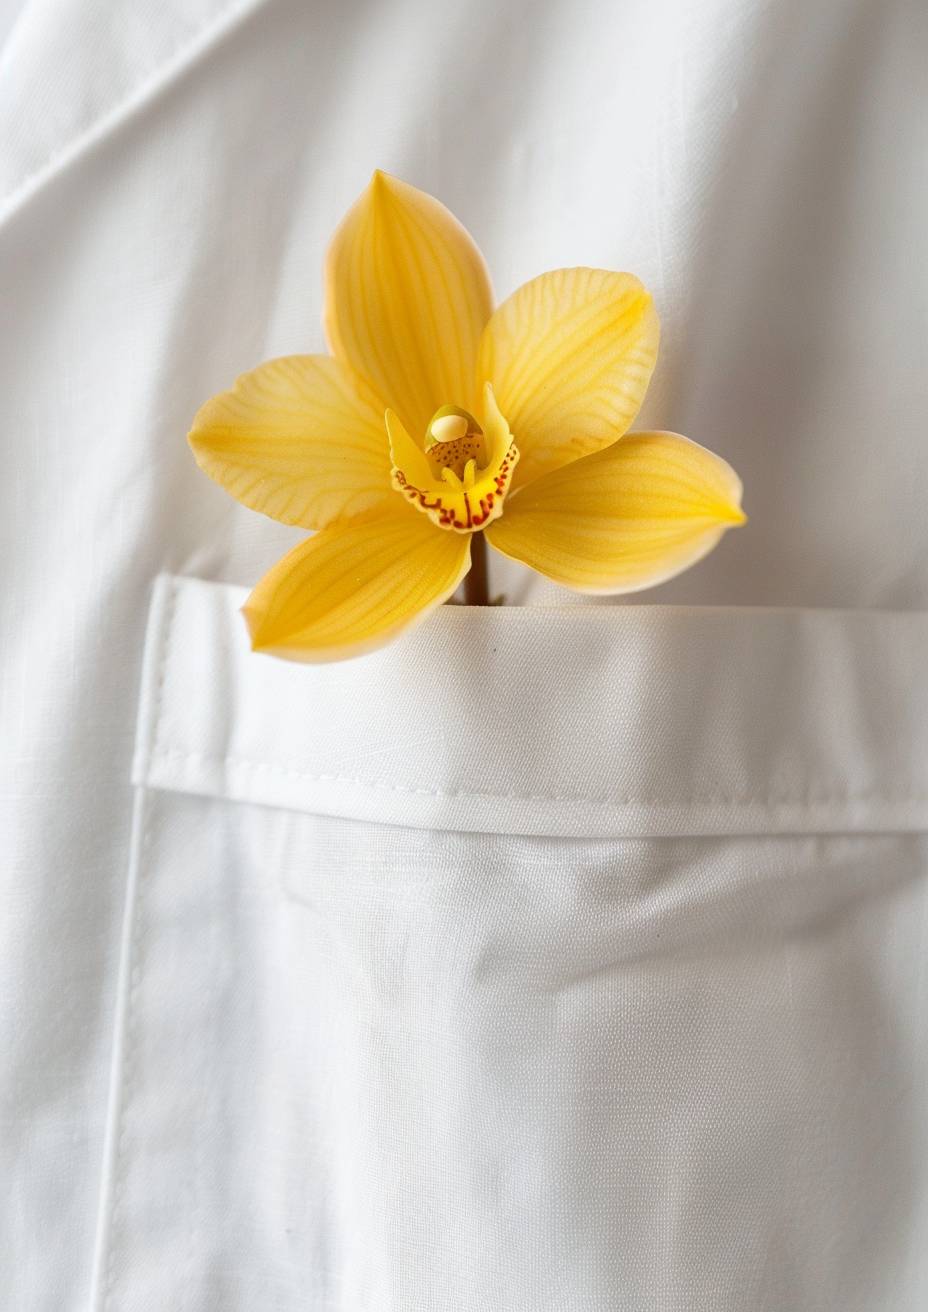 A symmetric minimalist close-up photo of a warm yellow orchid flower in the chest pocket of a doctor's professional white uniform, set against a pristine solid white background. Sharp focus.